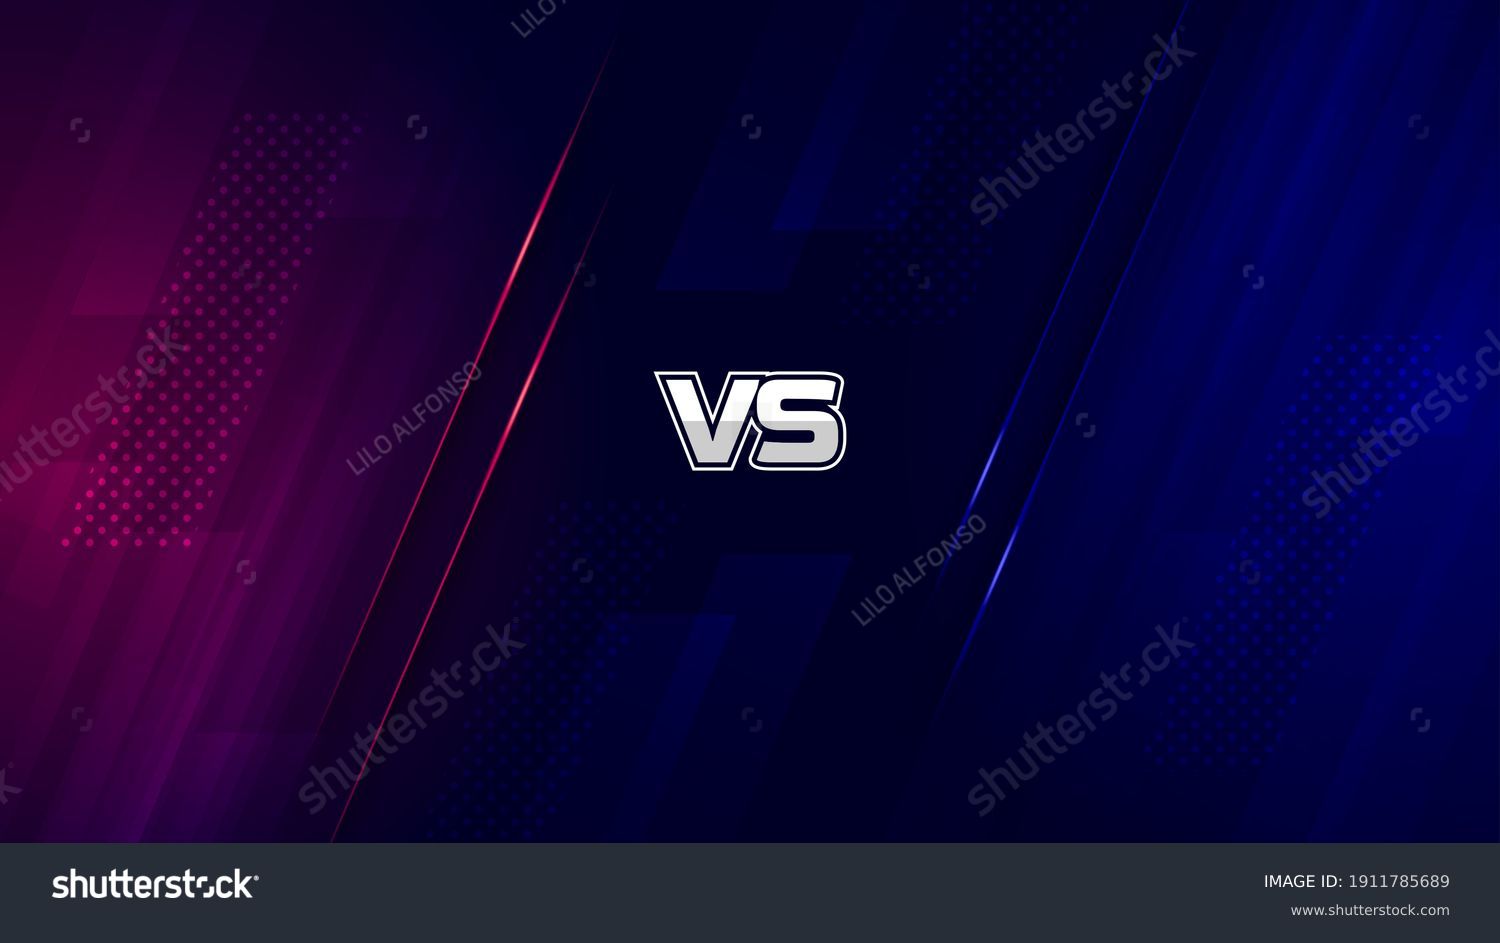 SVG of Modern versus background with rays effects svg